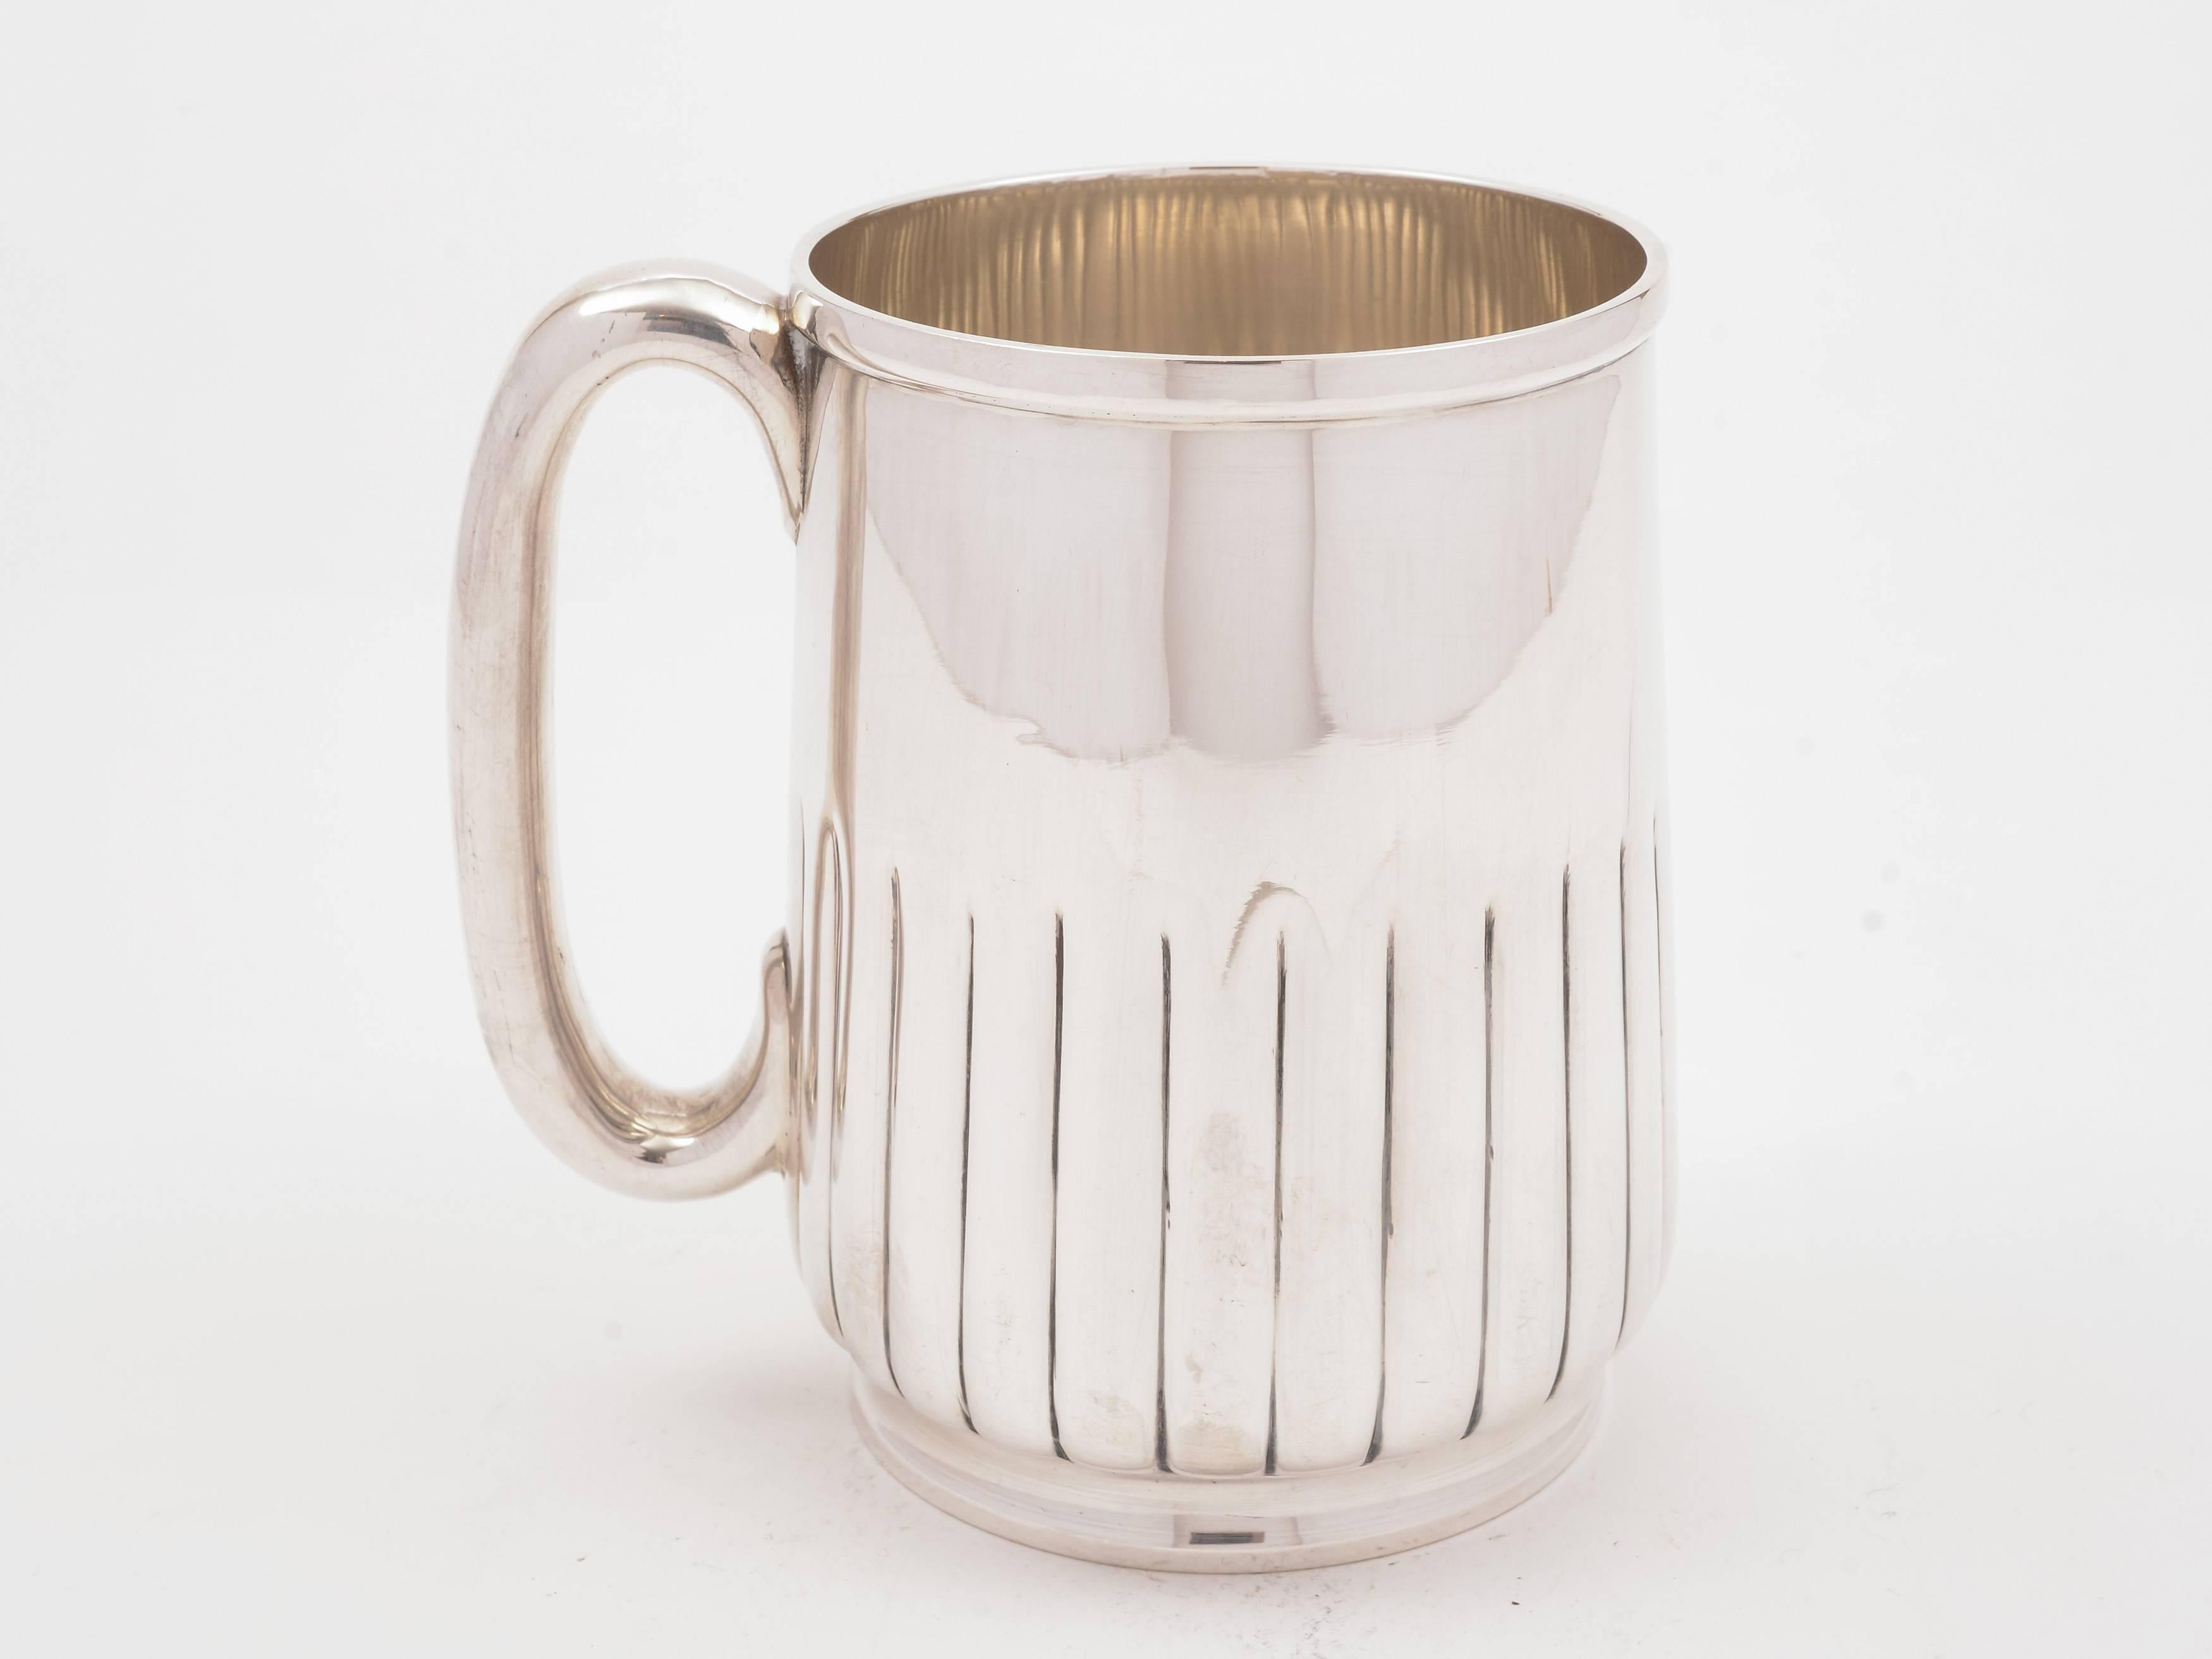 A good quality English Victorian silver plated pint tankard with fluted decoration to bottom half, circa 1890 and marked 'T.W' for the maker Thomas Wilkinson & Sons, Pelican Works, Sheffield. 

Measurements:
Height 4 1/2